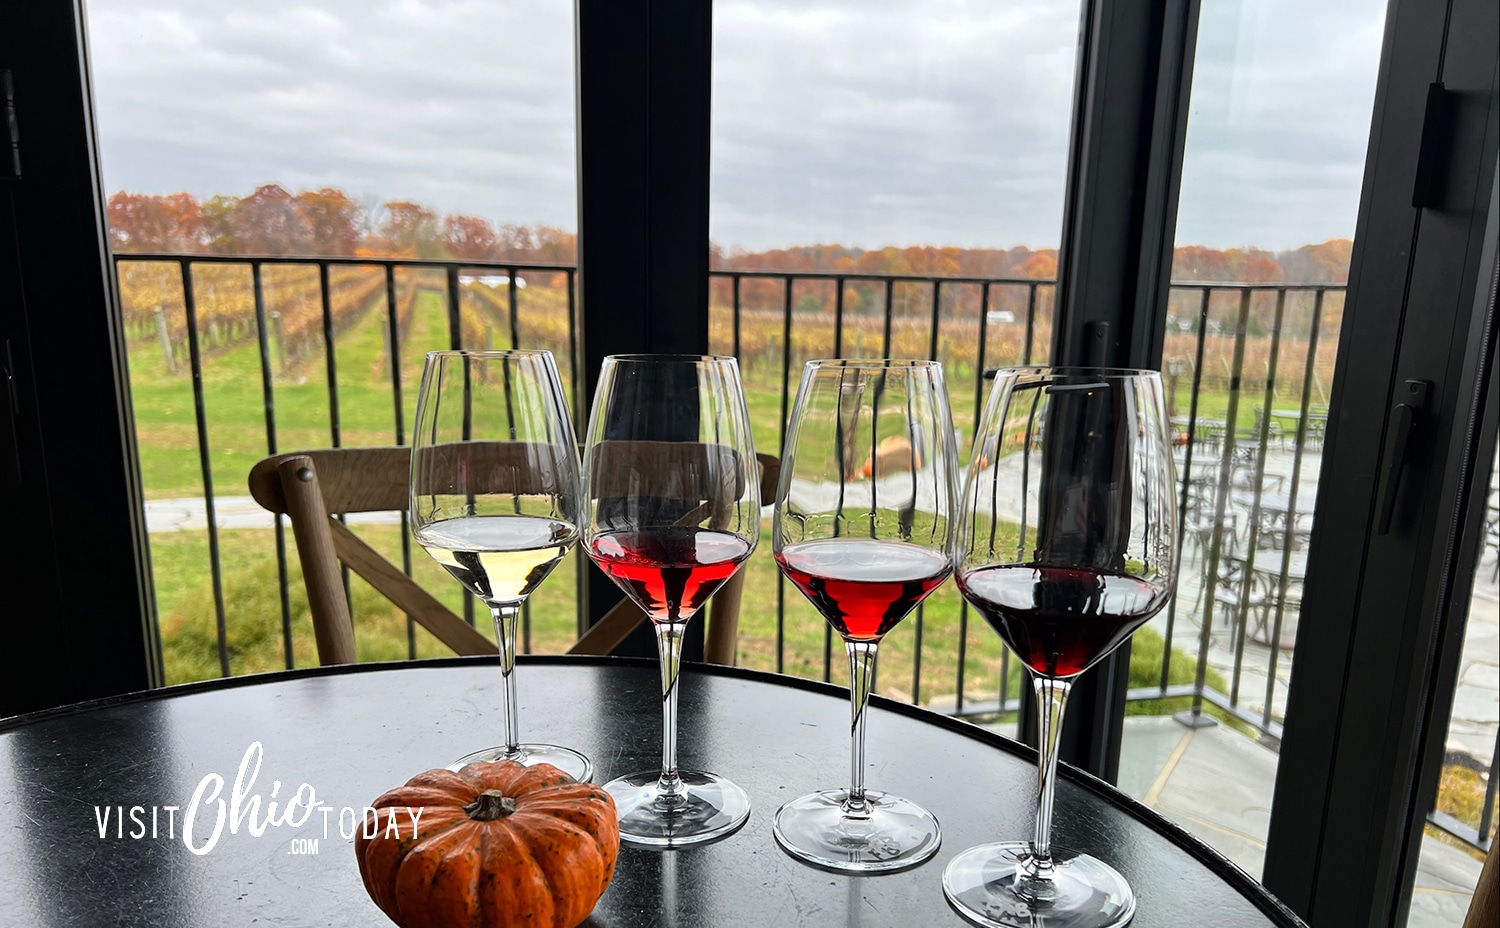 horizontal photo of four glasses of wine on a table in front of a window with a vineyard in the background at Laurentia Vineyard. Photo credit: Cindy Gordon of VisitOhioToday.com